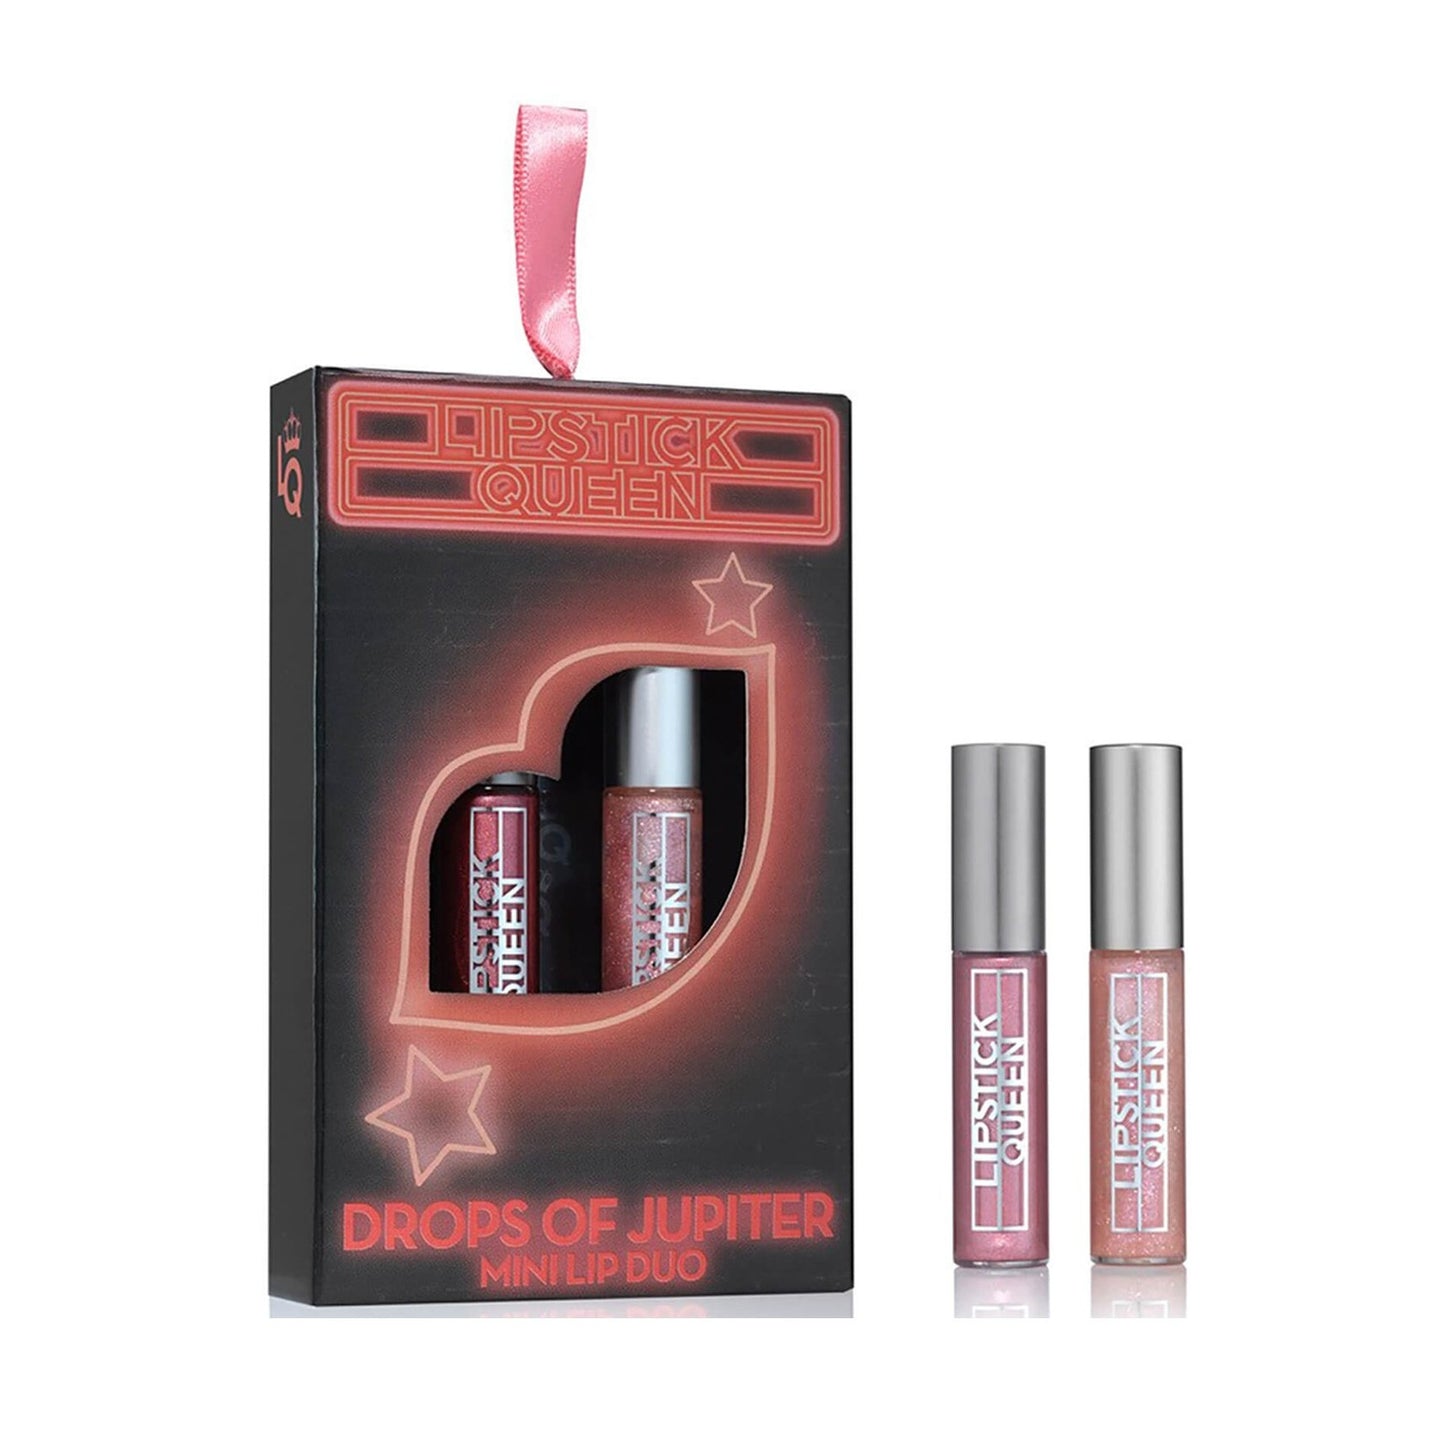 Lipstick Queen Drops Of Jupiter in the color Time warp & Supernova Gift Set Limited Edition